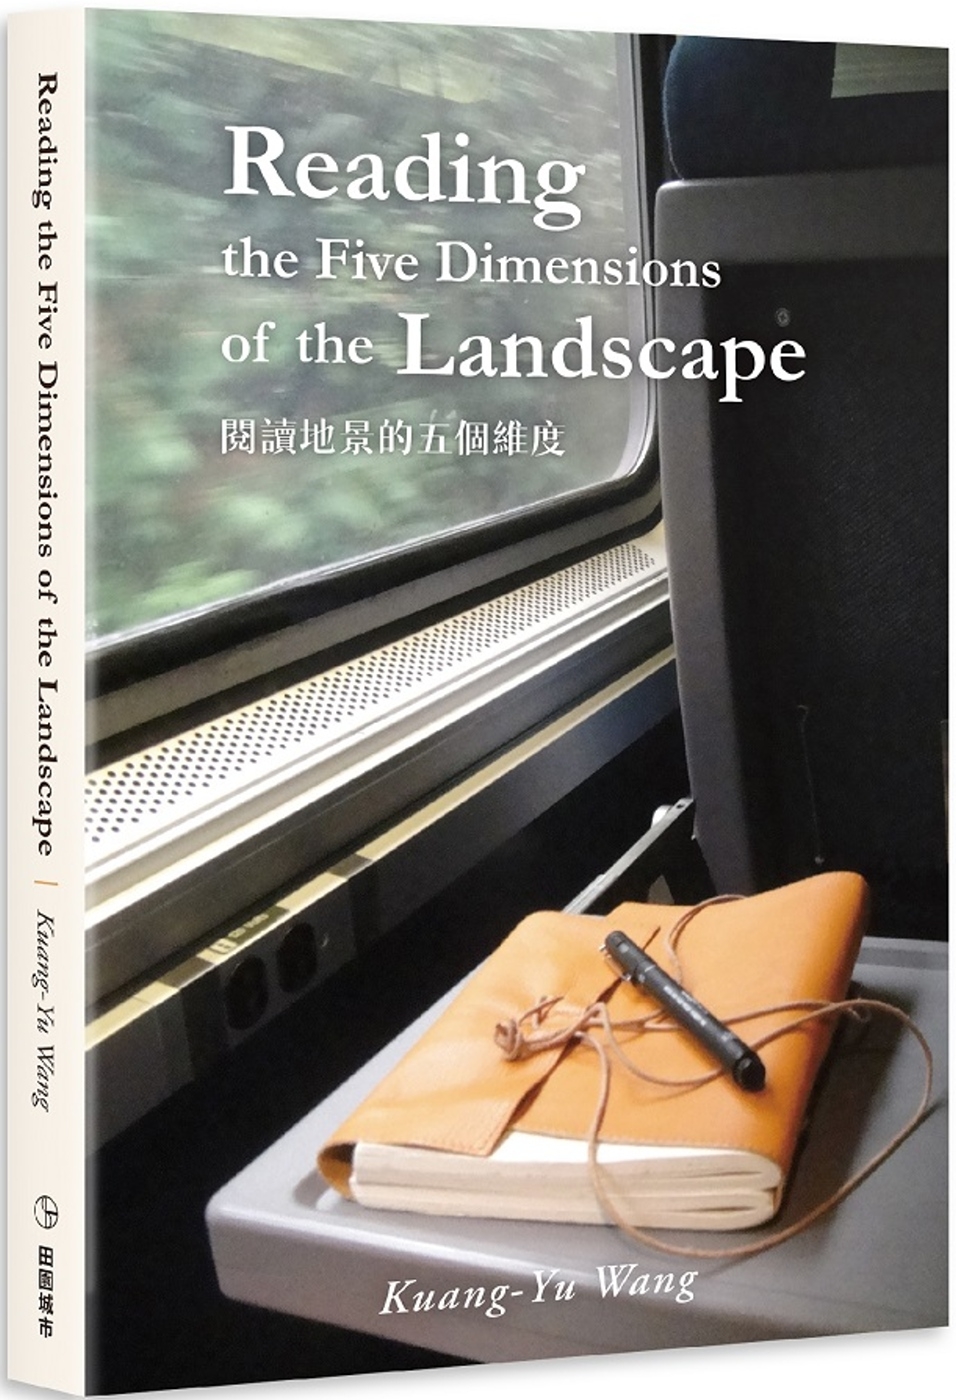 Reading the Five Dimensions of...